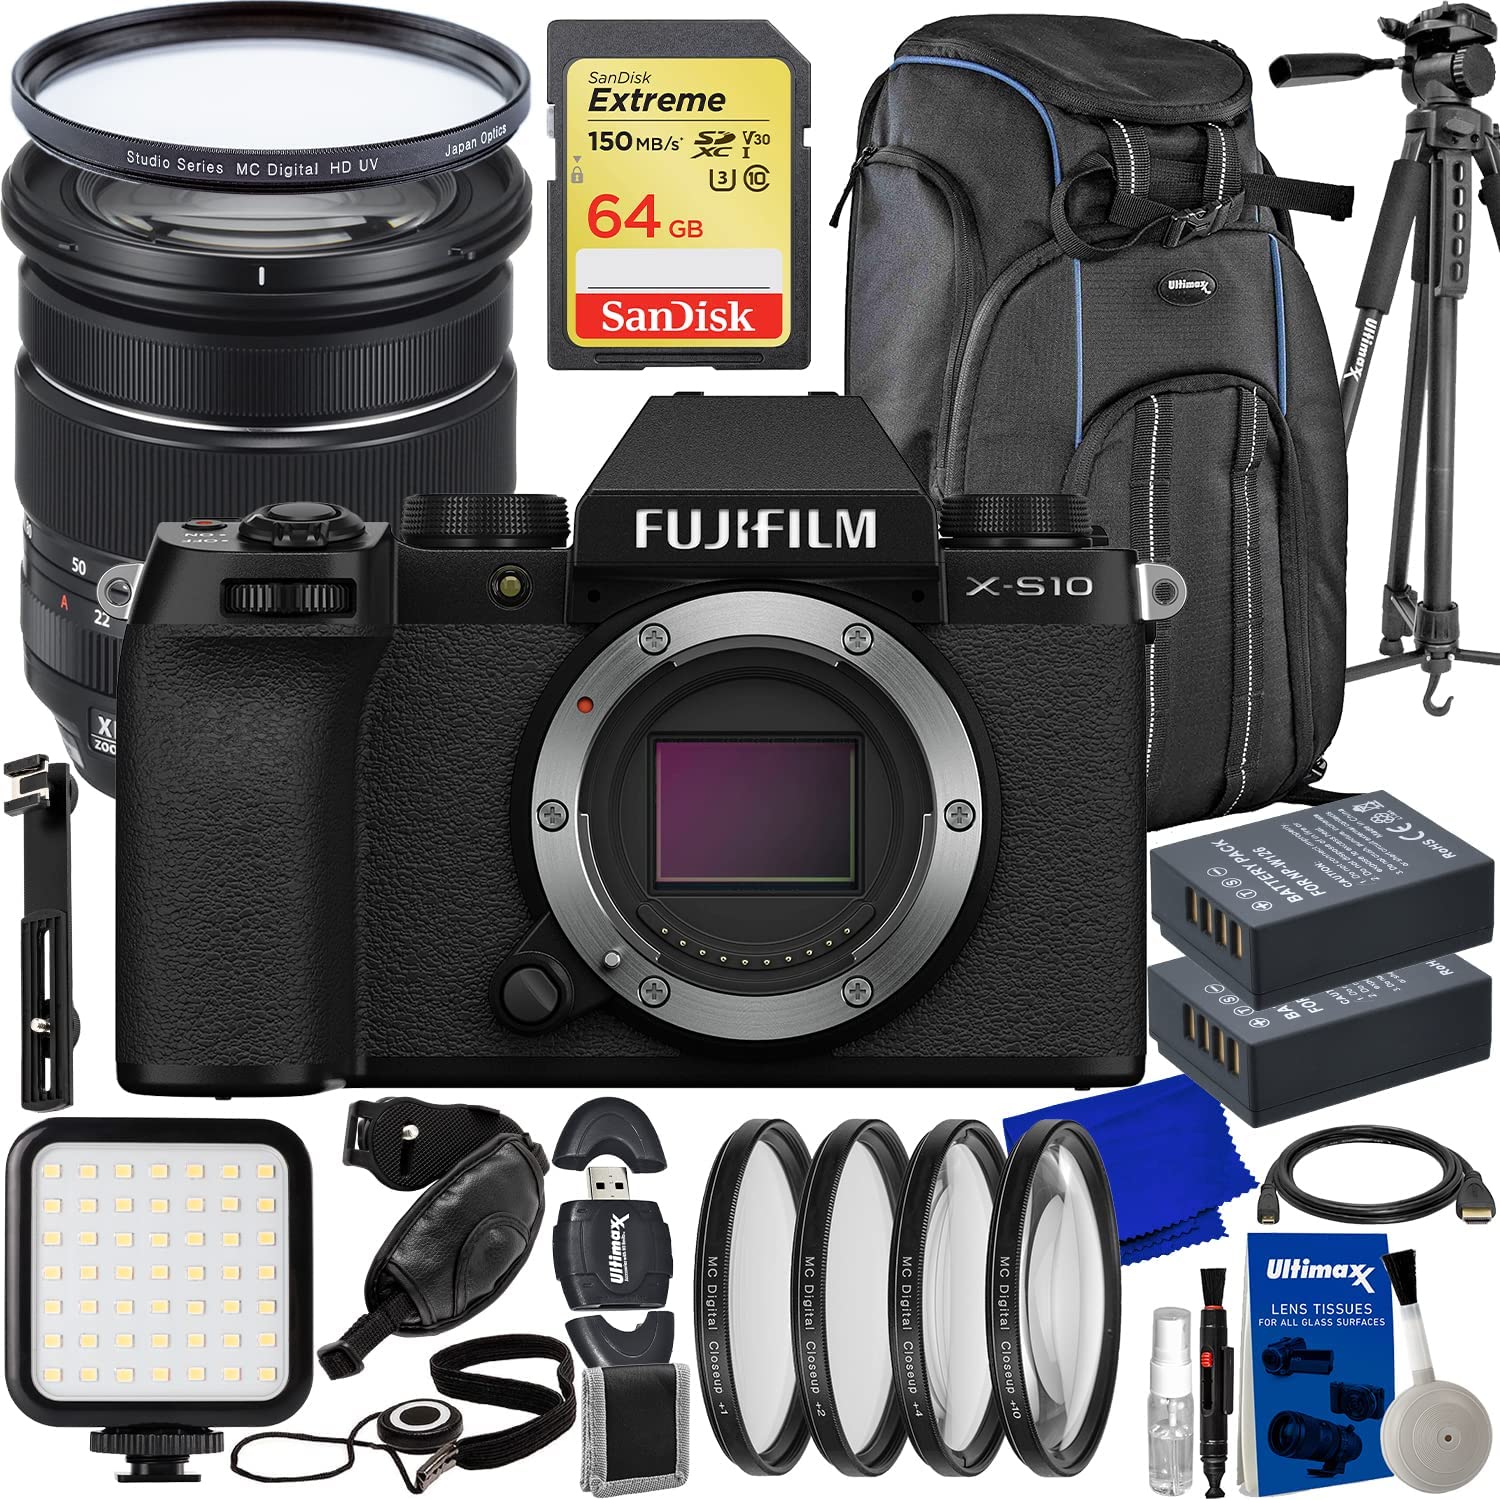 FUJIFILM X-S10 Mirrorless Camera with 16-80mm Lens + SanDisk 64GB Extreme SDXC, Deluxe Camera Backpack, 2X Extended Life Batteries, Protective Multi-Coated UV Filter & Much More (30pc Bundle)